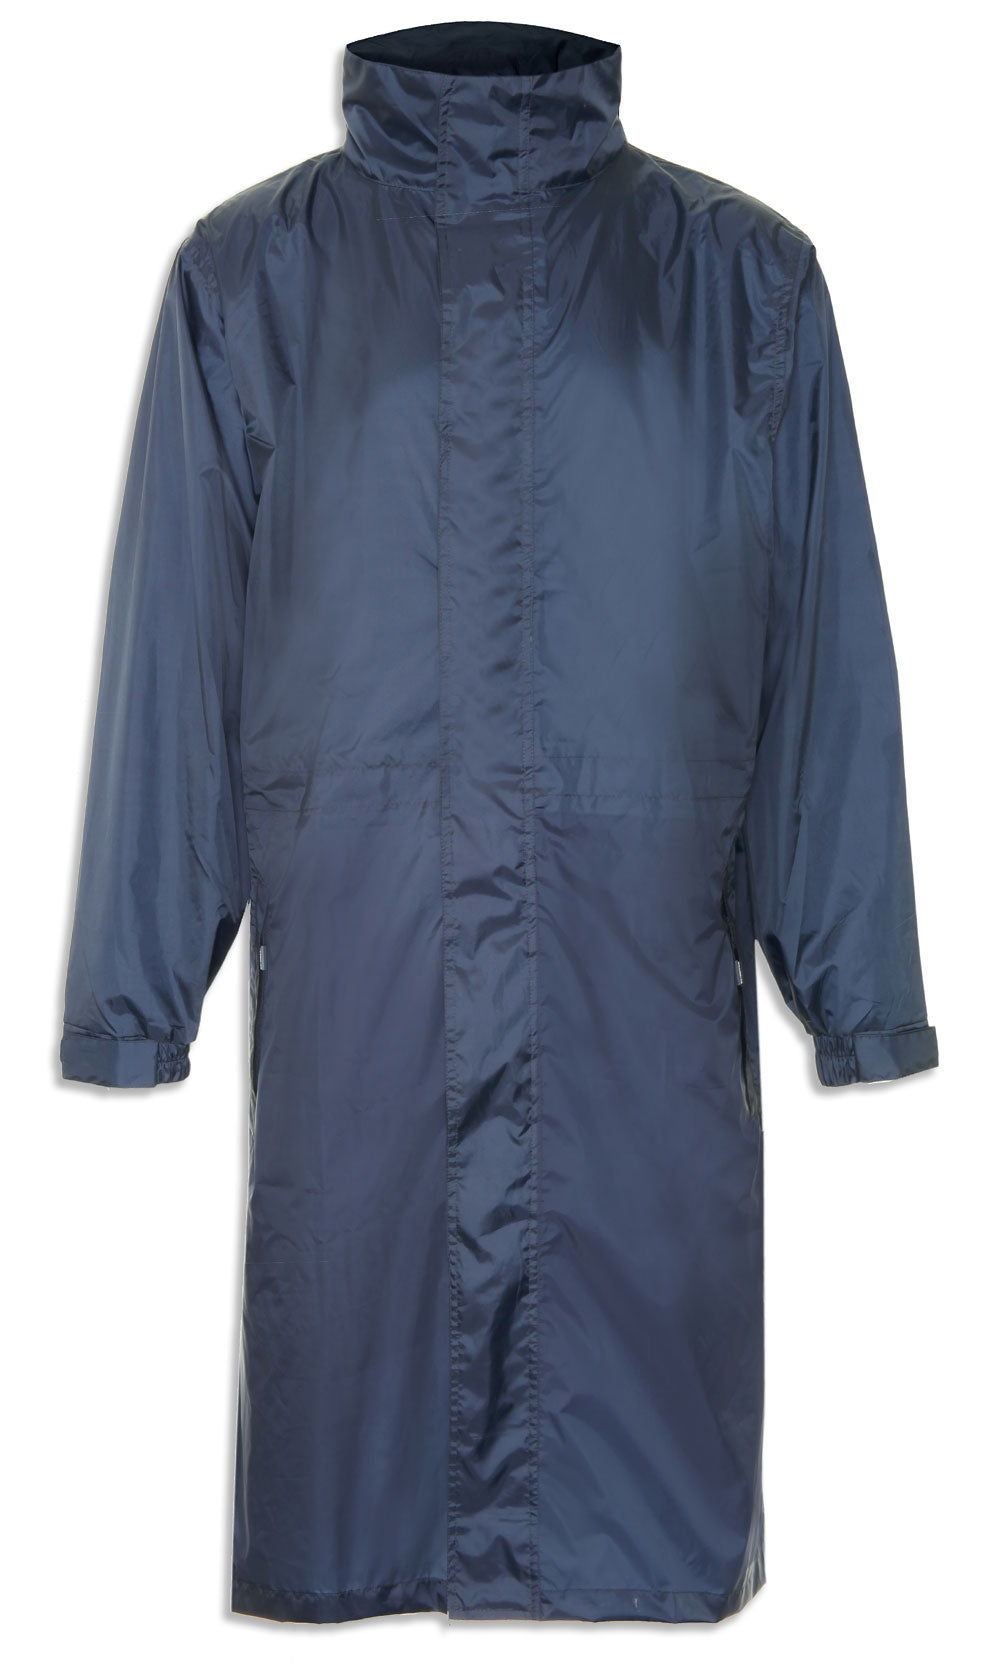 Champion Storm Long Waterproof Coat in Navy on a white background.